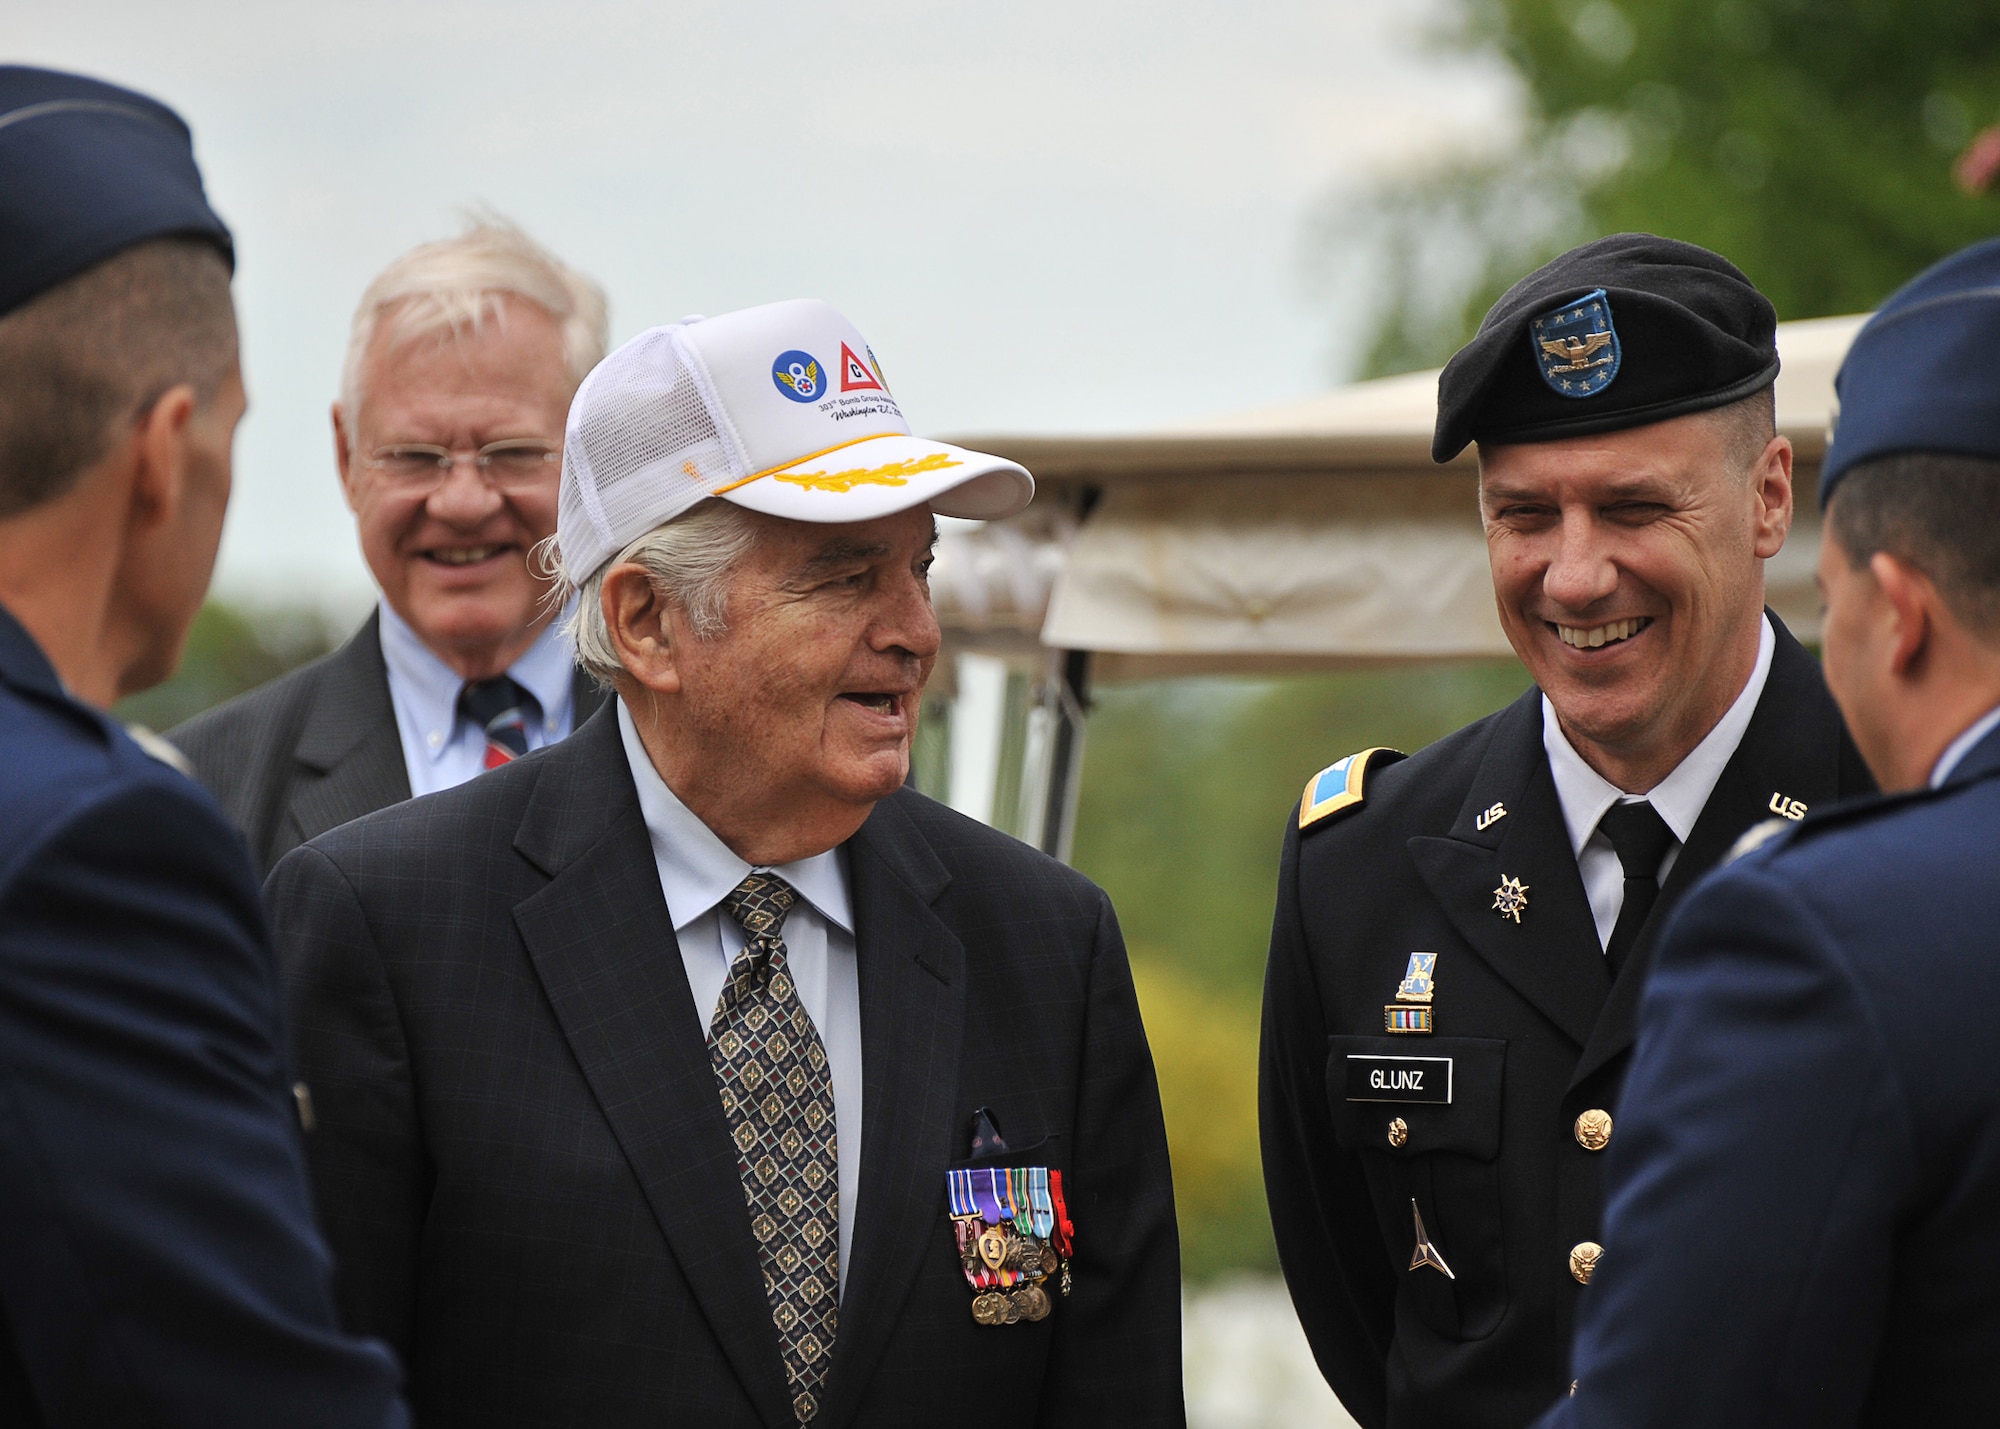 303rd Bomb Group veteran Eddie Deerfield shares a light moment with JAC Commander Army Colonel Matt Glunz, as JAC Historian Peter Park looks on during the May 13th HELL’S ANGELS DAY celebration (U.S. Air Force photo by Staff Sgt. Javier Cruz)